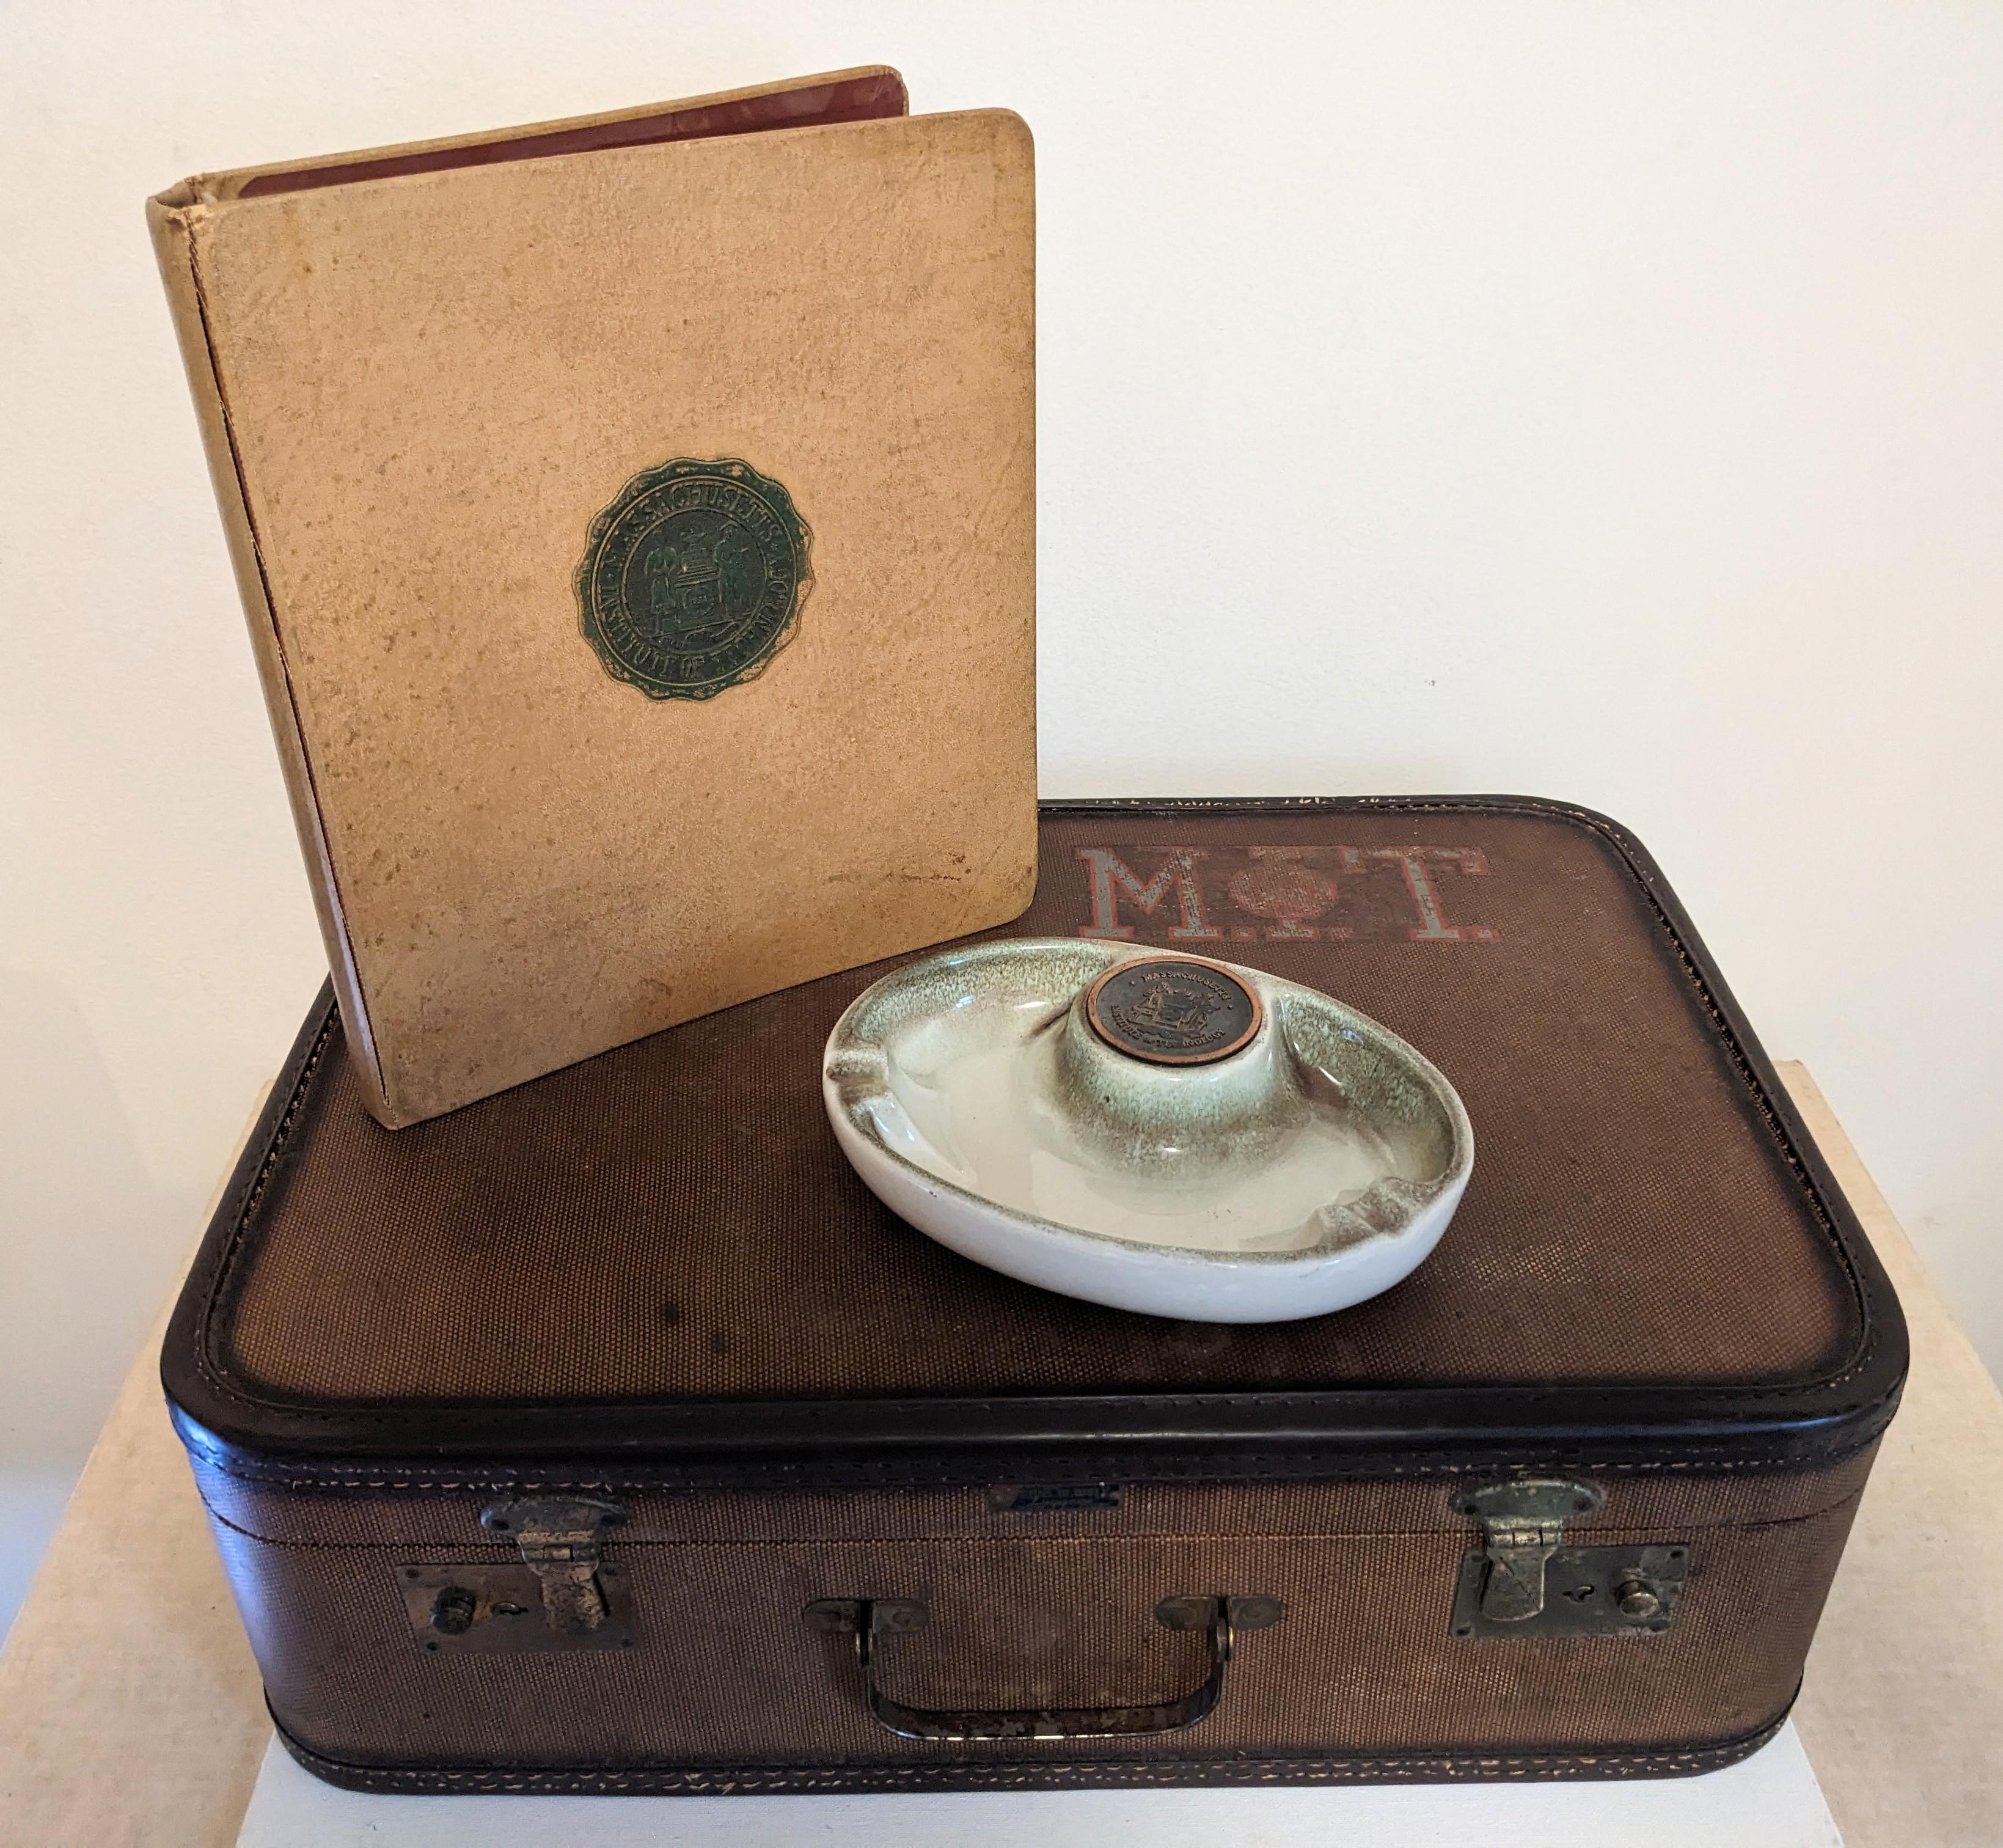 Mid Century Massachusetts Institute of Technology Collectibles. Upgrade your legacy and clout with a few well placed trinkets from Mid Century M.I.T. scattered around your home.
Includes suitcase with MIT label, Ashtray and Binder. 1950 USA. 